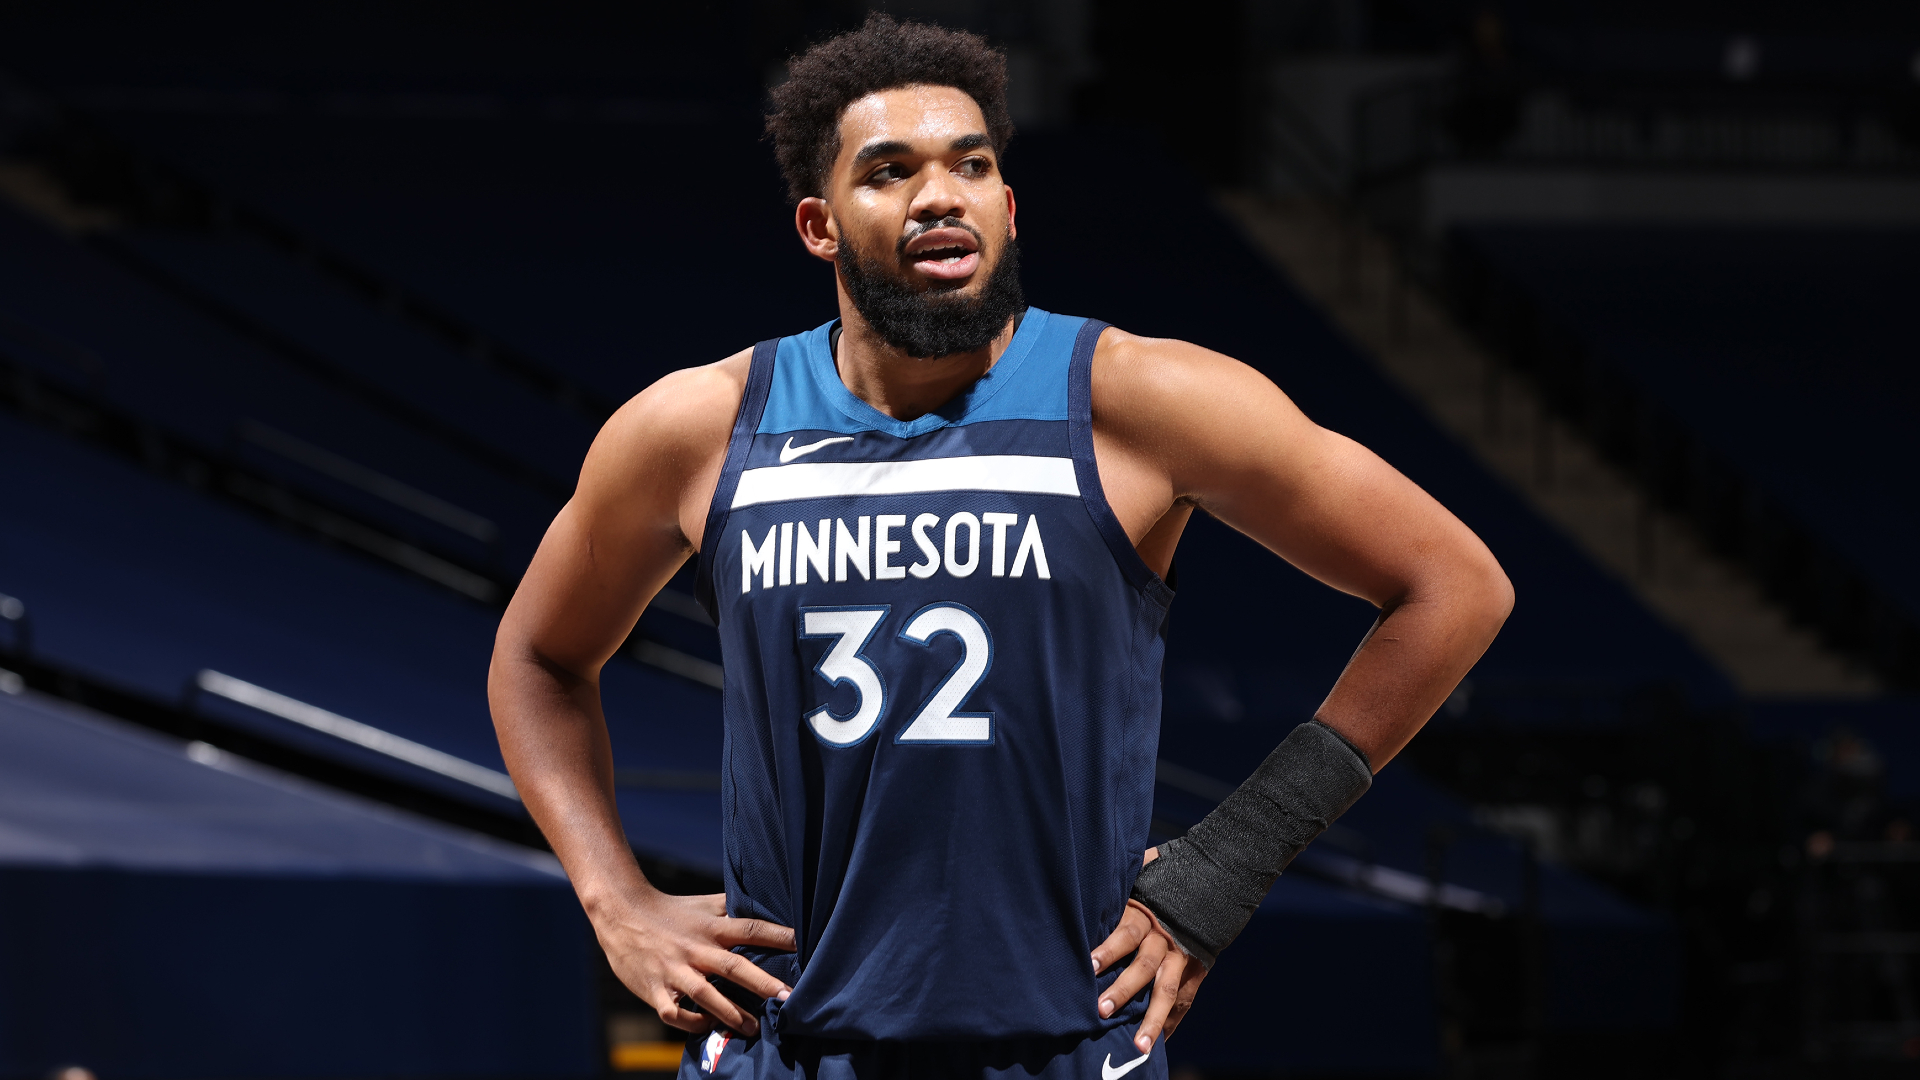 Karl-Anthony Towns tests positive for coronavirus as 'nightmare' continues